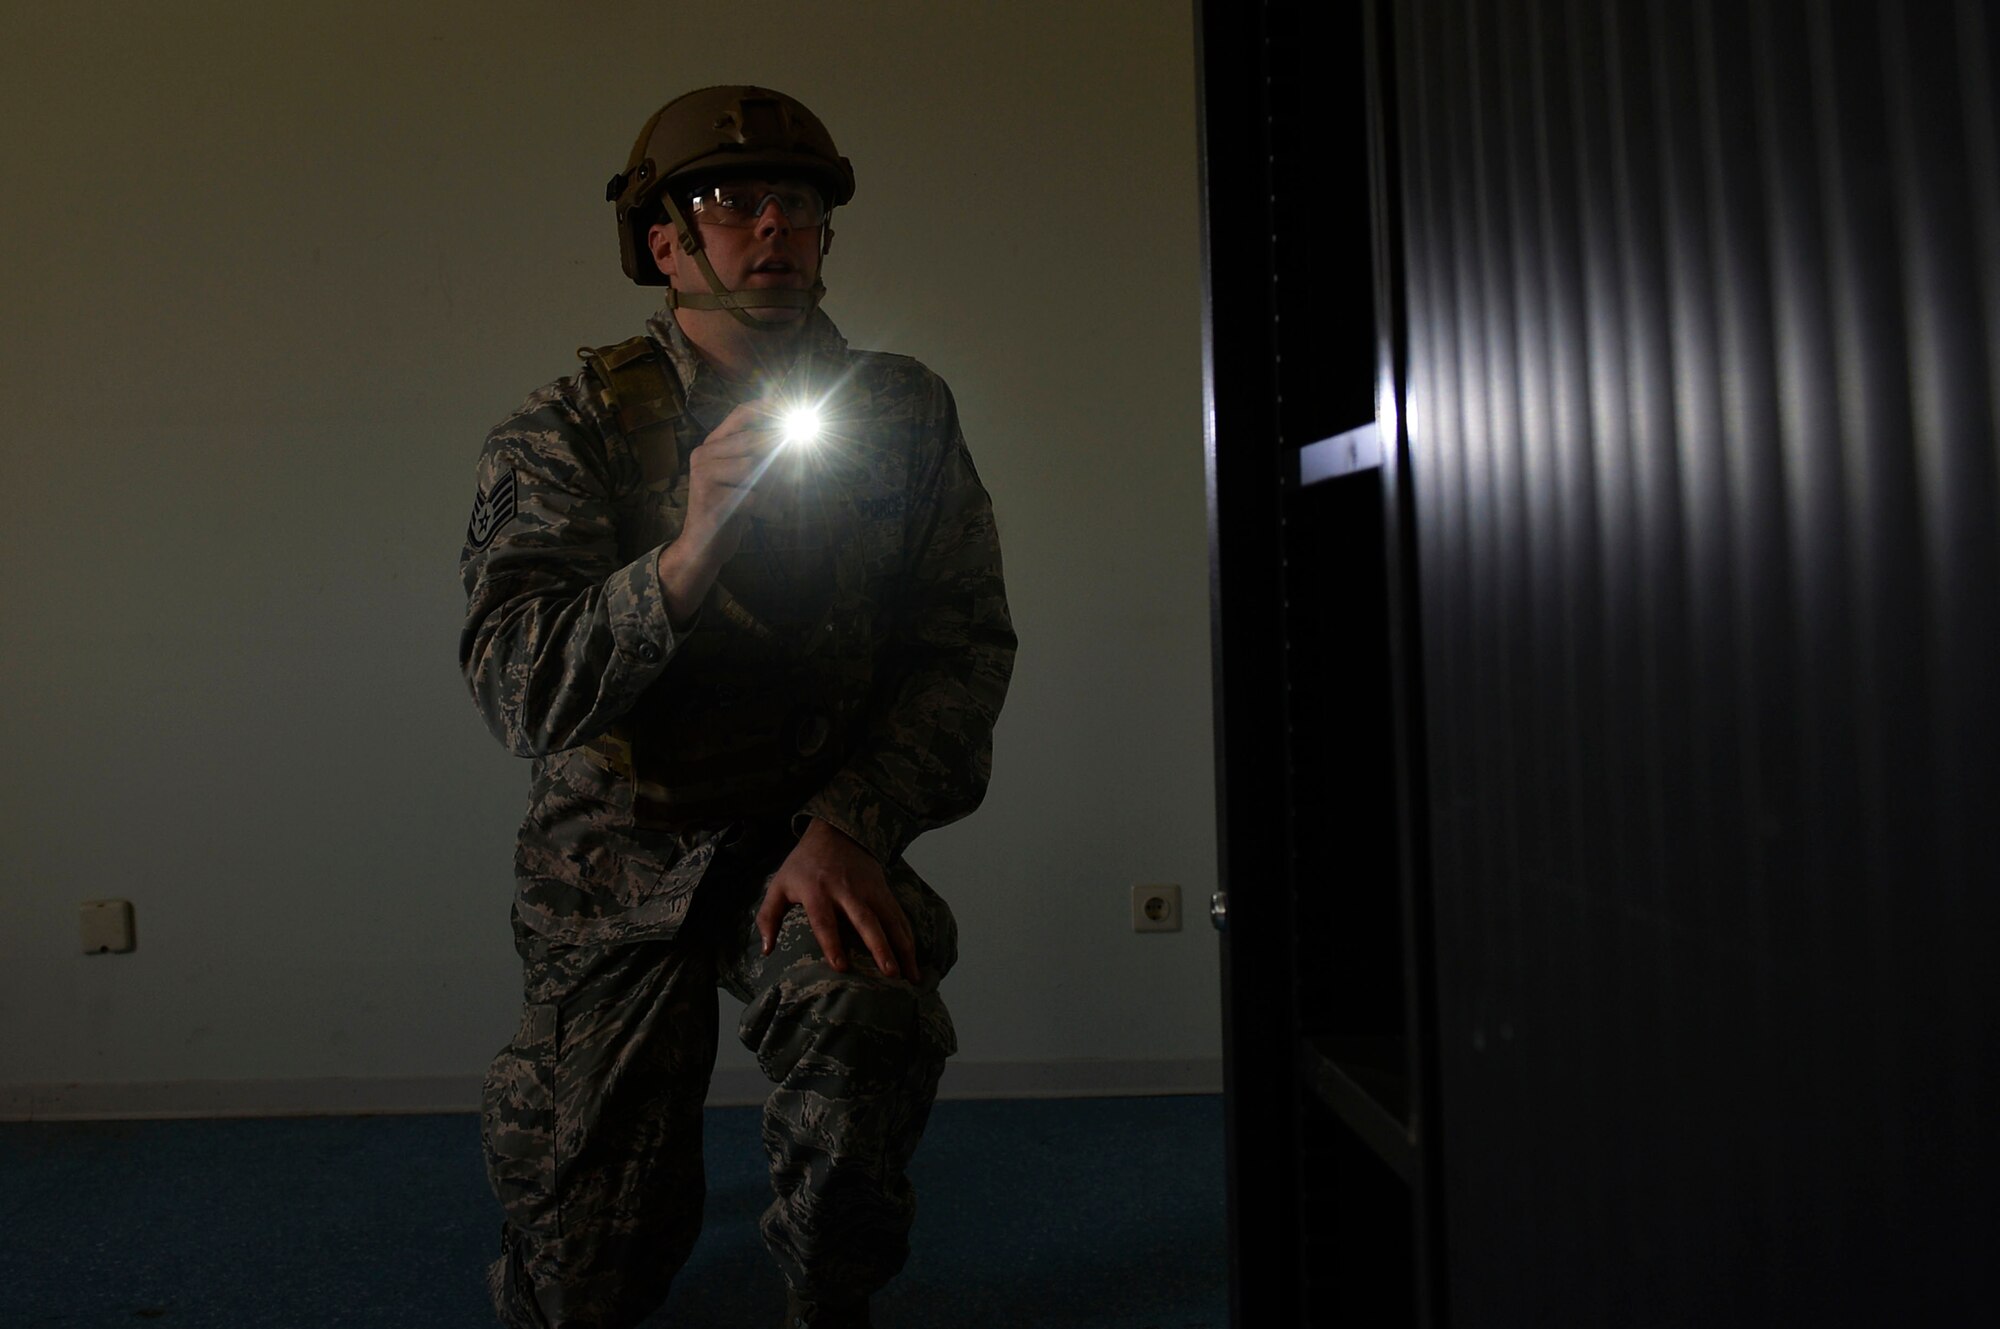 Staff Sgt. Brook Hamilton, 52nd Civil Engineer Squadron explosive ordnance disposal craftsman, performs a clearing operation in a building during an exercise on Ramstein Air Base, Germany, March 23, 2017. The operation took place in newly established training ground, which featured a mock-village where various scenarios could take place. Exercise Silver Flag takes place more than once a year, and is hosted by the 435th Contingency Response Group. (U.S. Air Force photo by Airman 1st Class Joshua Magbanua)